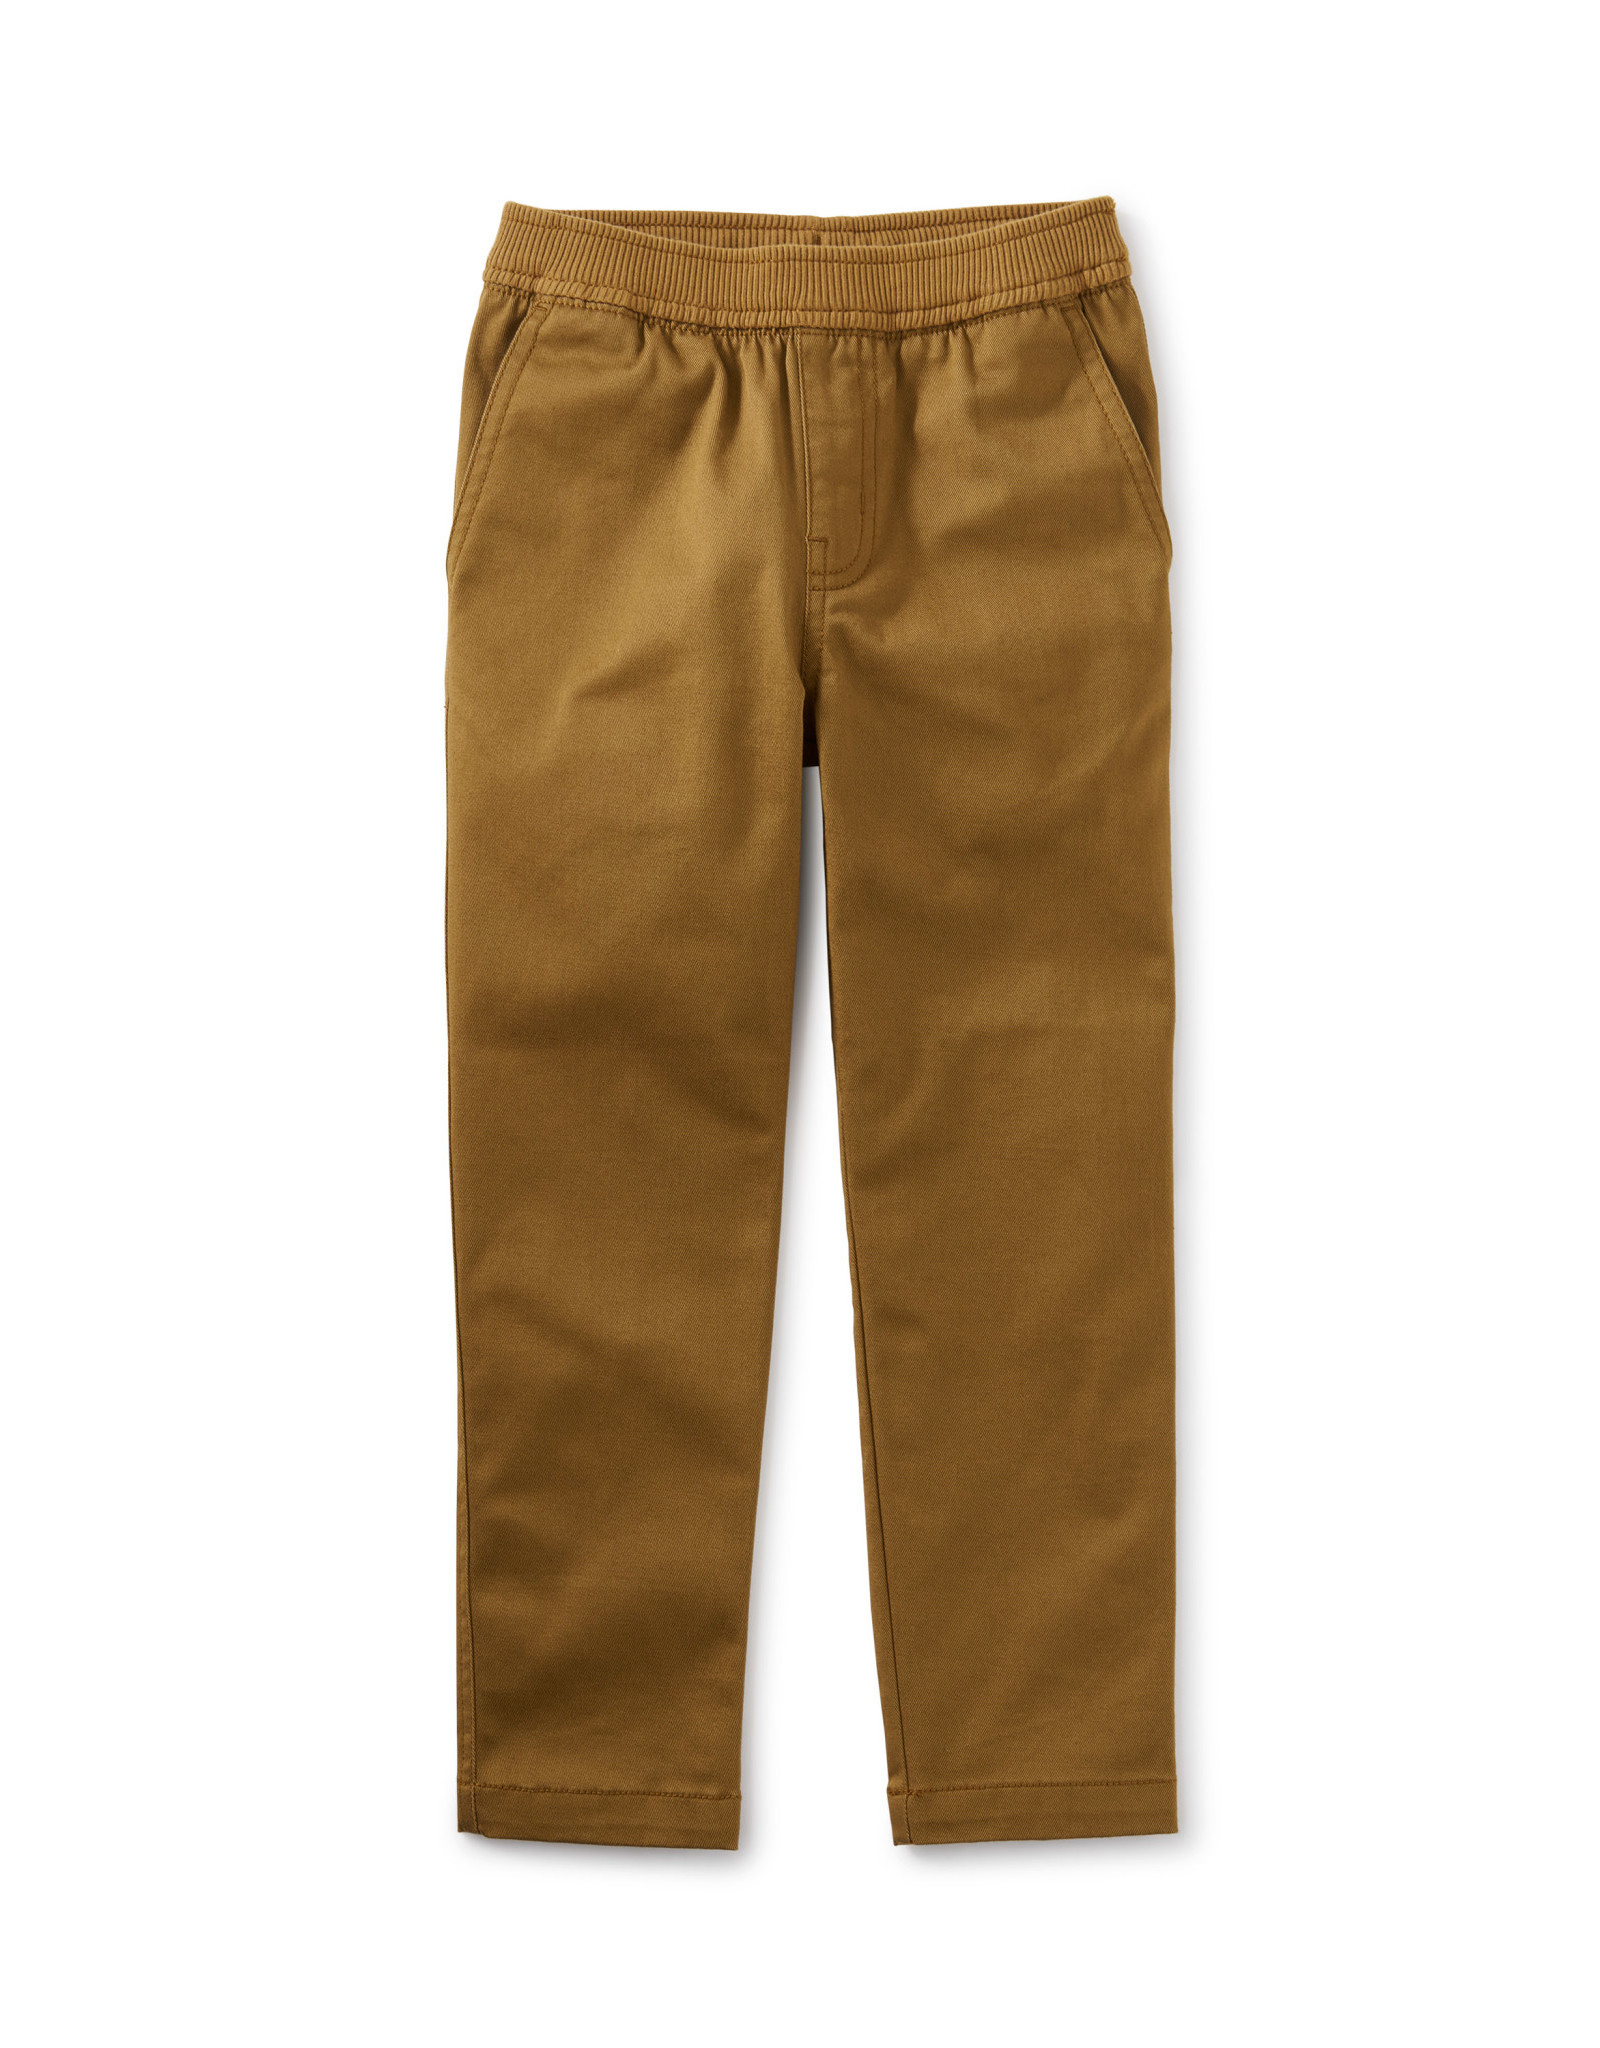 Tea Collection Timeless Stretch Twill Pants- Umber